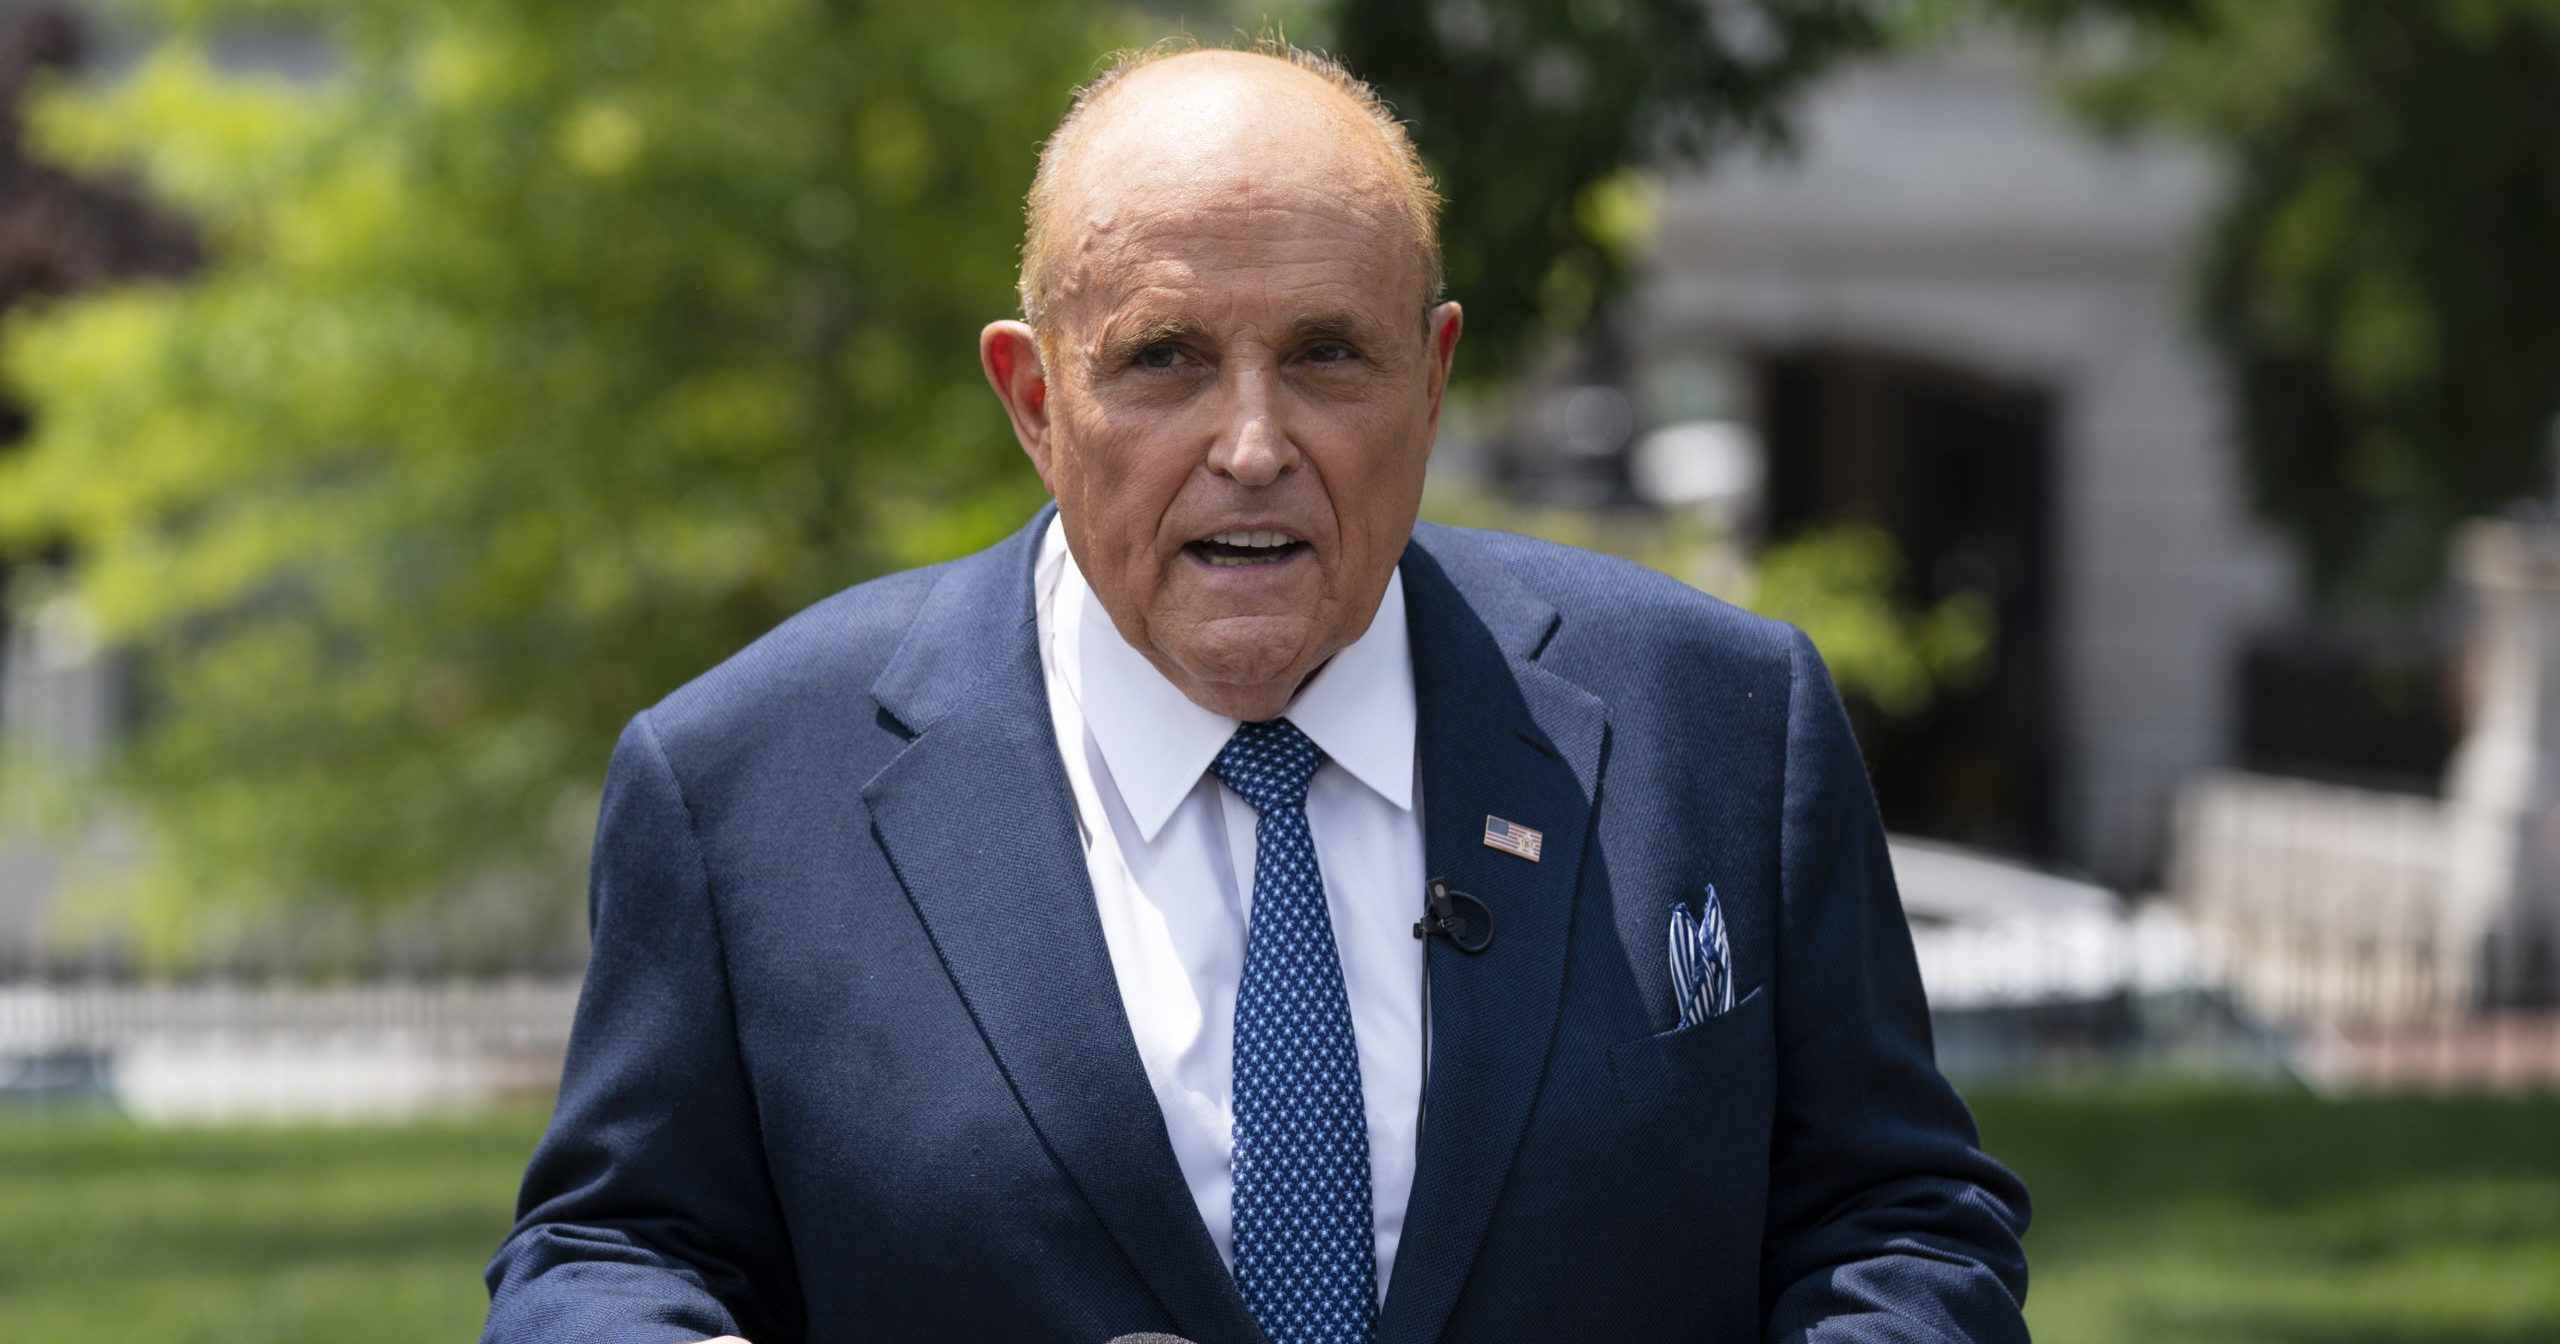 Rudy Giuliani talks with reporters outside the White House on July 1, 2020, in Washington, D.C.